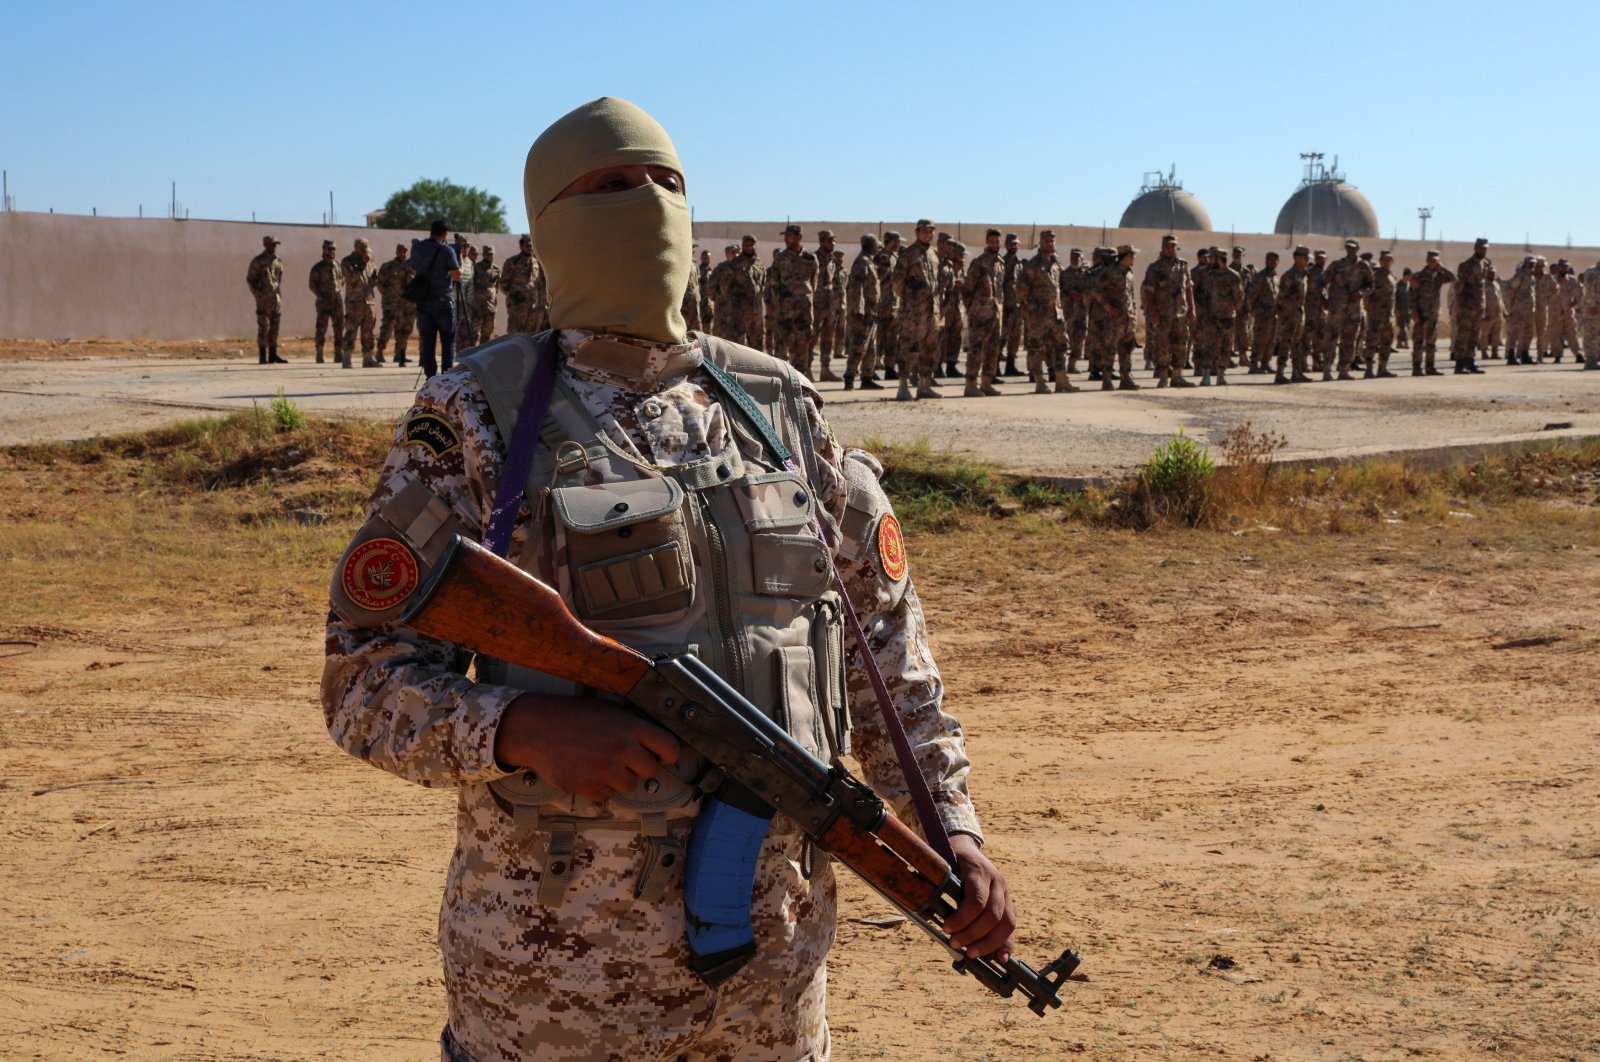 Members of the Petroleum Facilities Guard are seen at the Azzawiya oil refinery, in Zawiyah, west of Tripoli, Libya July 23, 2020. (Reuters File Photo)